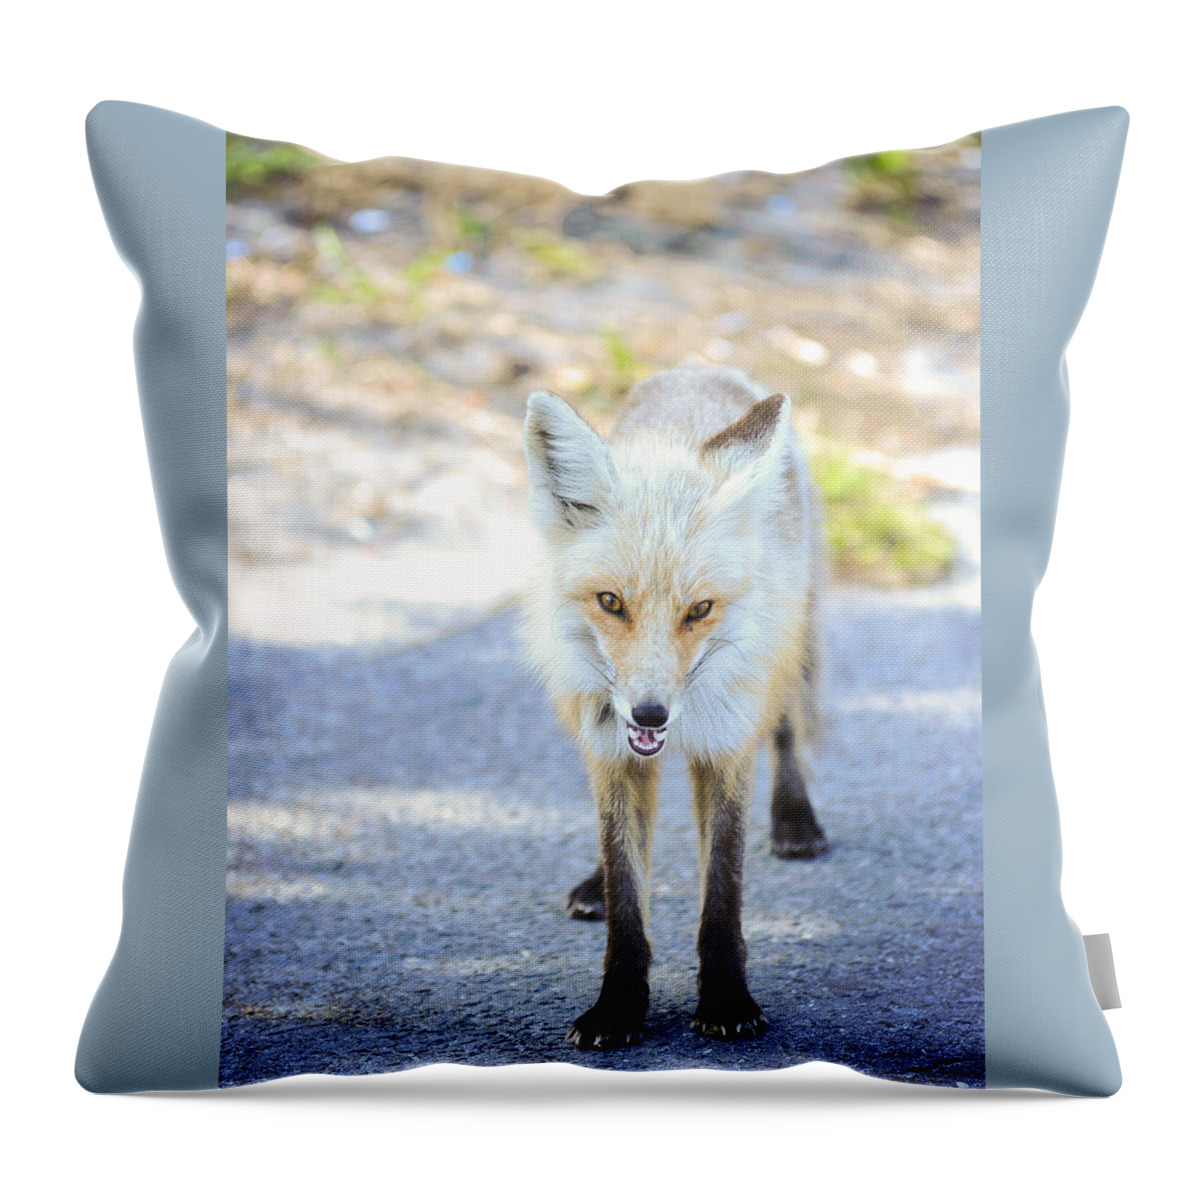 Fox Throw Pillow featuring the photograph The Stare by Terry DeLuco